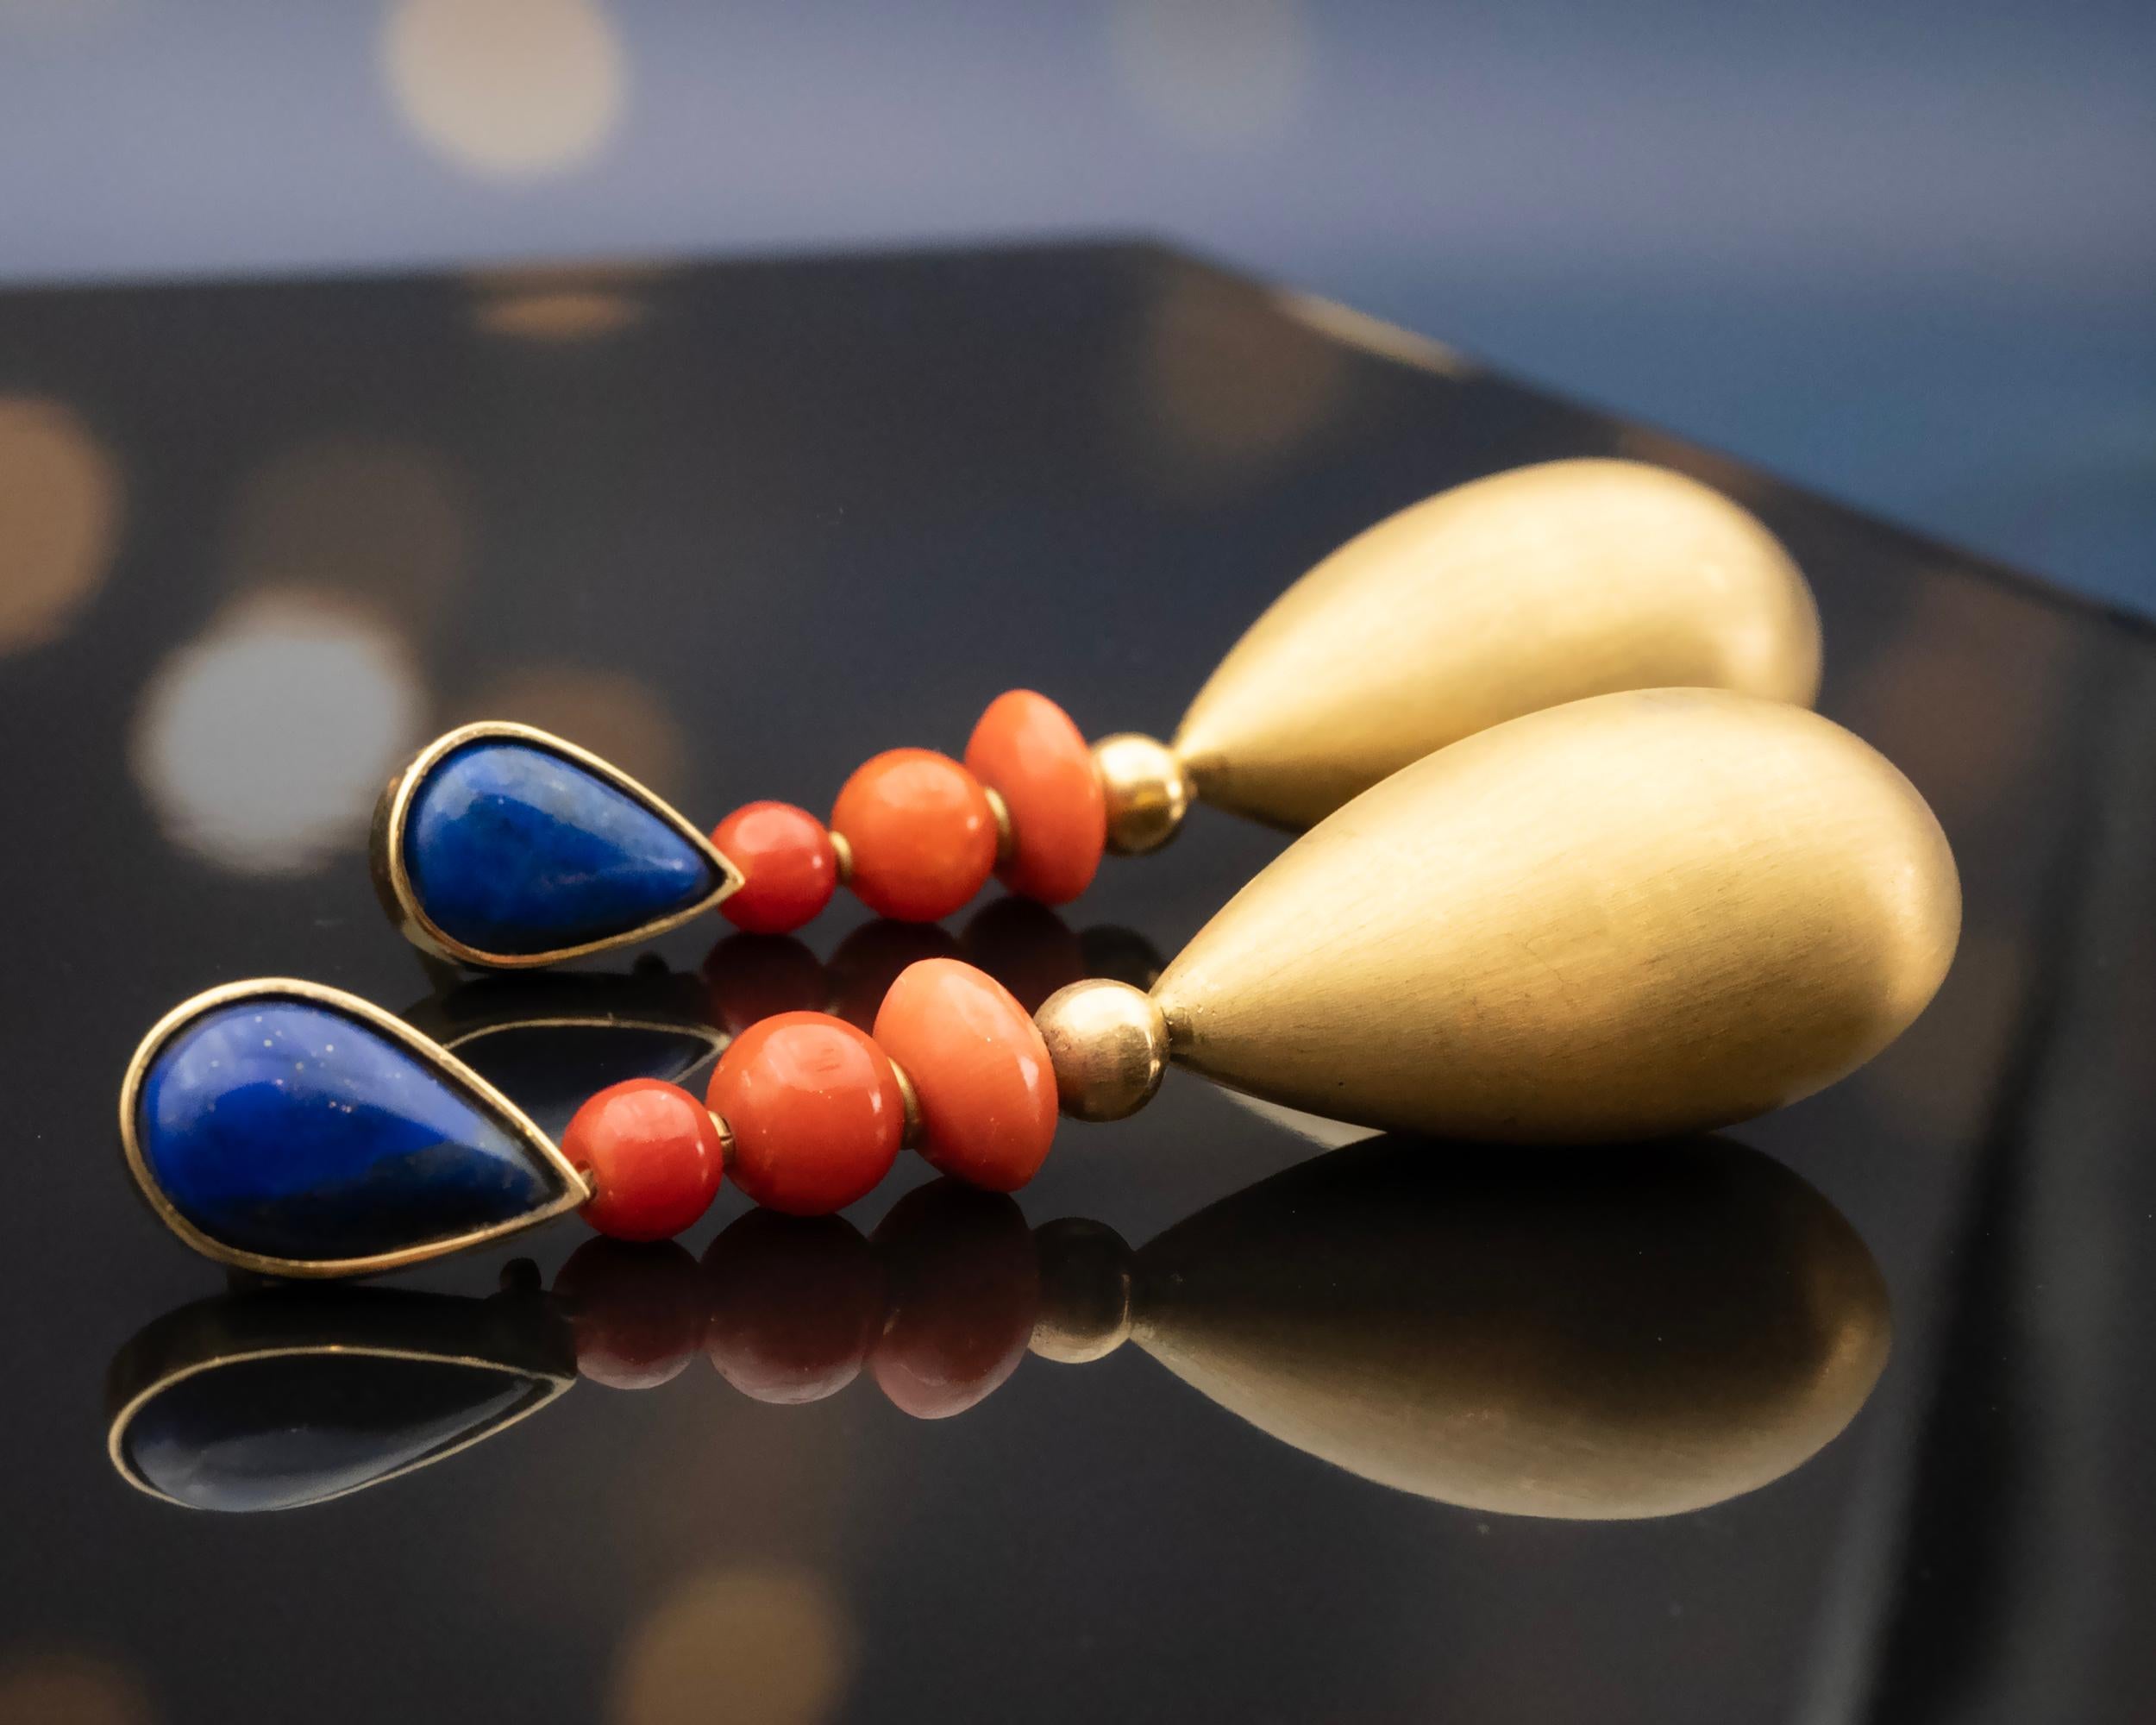 Introducing these stunning 18 karat yellow gold earrings. Meticulously handcrafted, each earring features a pear-shaped lapis lazuli on the lobe, complemented by three dangling coral beads in a subtle gradient of colours. The design takes a modern